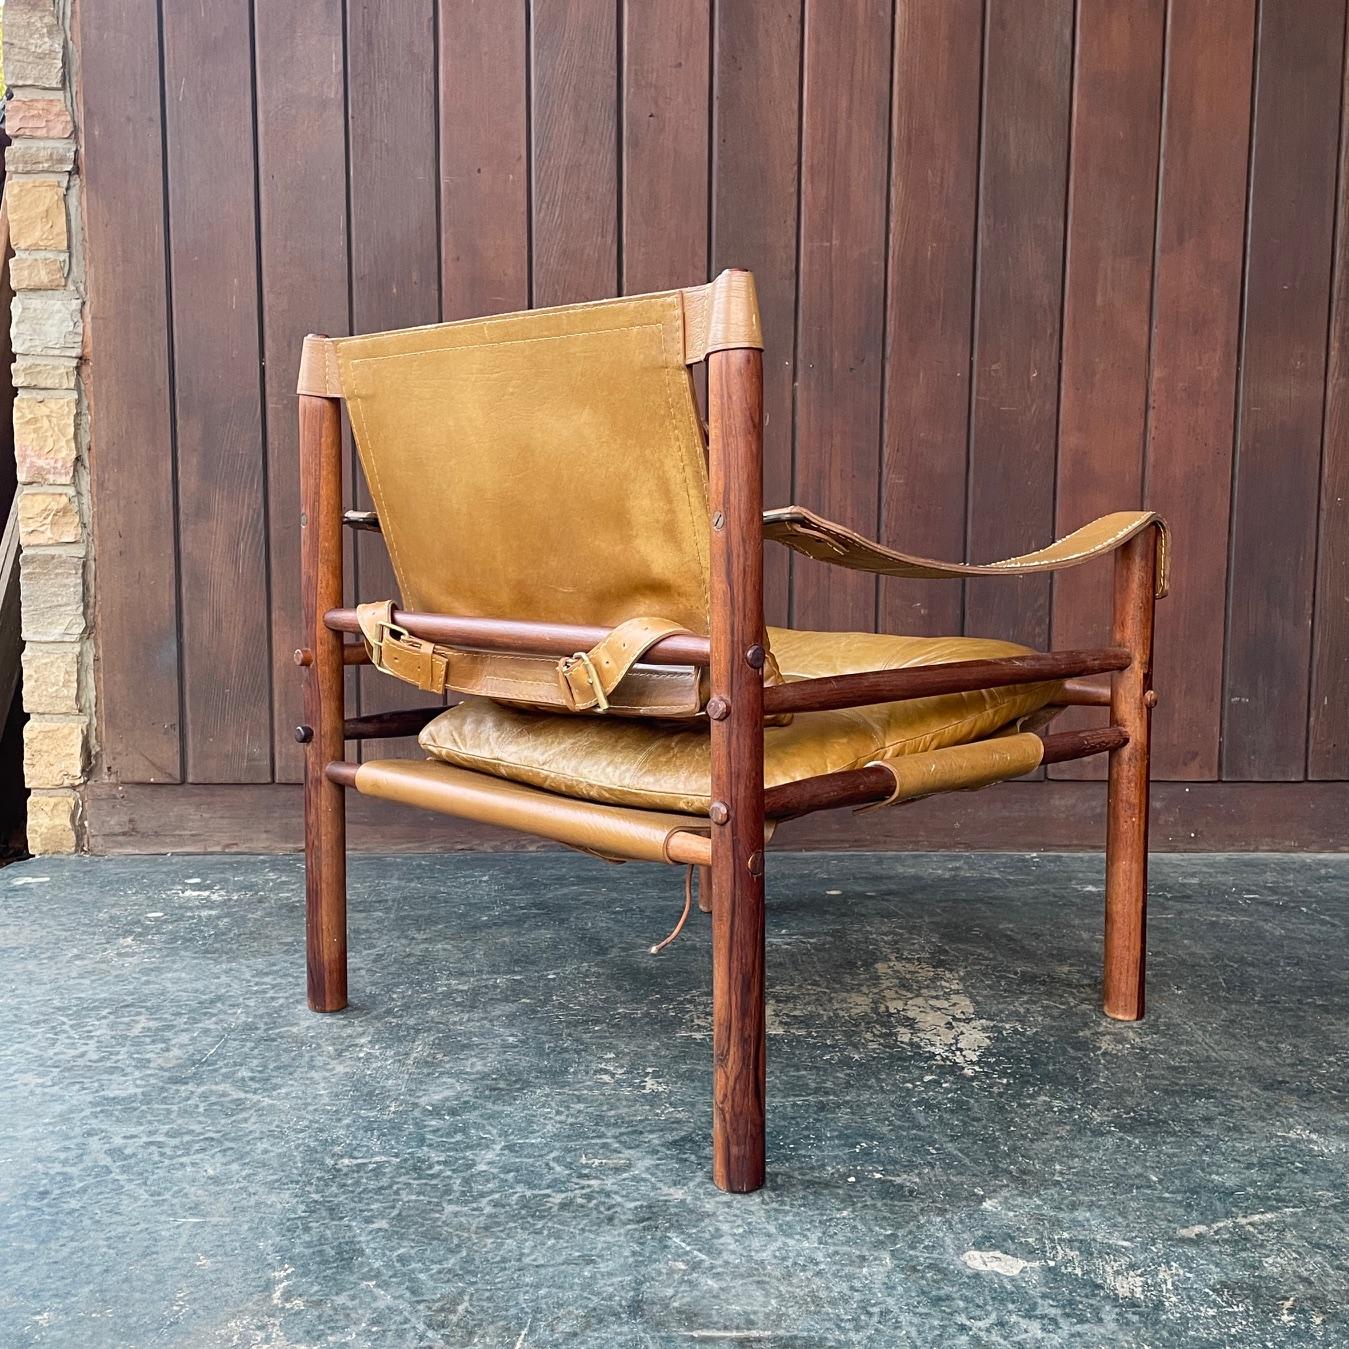 1960s Arne Norell Rosewood Leather Sling Sirocco Safari Lounge Chair Mid-Century In Distressed Condition For Sale In Hyattsville, MD